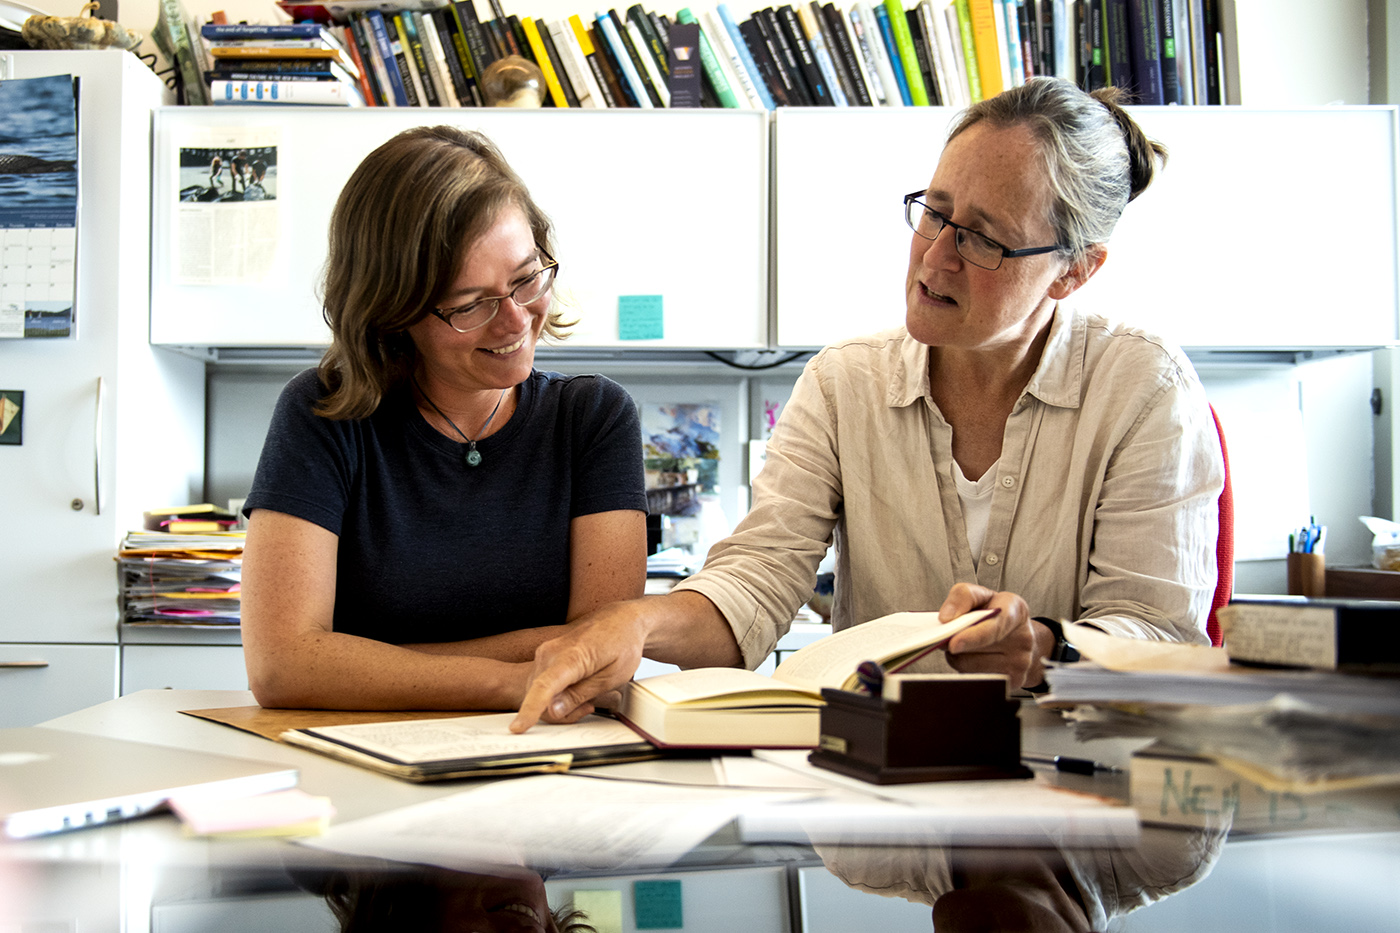 Northeastern’s Women Writers Project posthumously gives women a voice by transcribing and republishing their long-forgotten writing from the 1500s to the 1850s. Assistant director, Sarah Connell, and director and professor of practice in English, Julia Flanders, compare their transcription to an original text. Photo by Ruby Wallau/Northeastern University